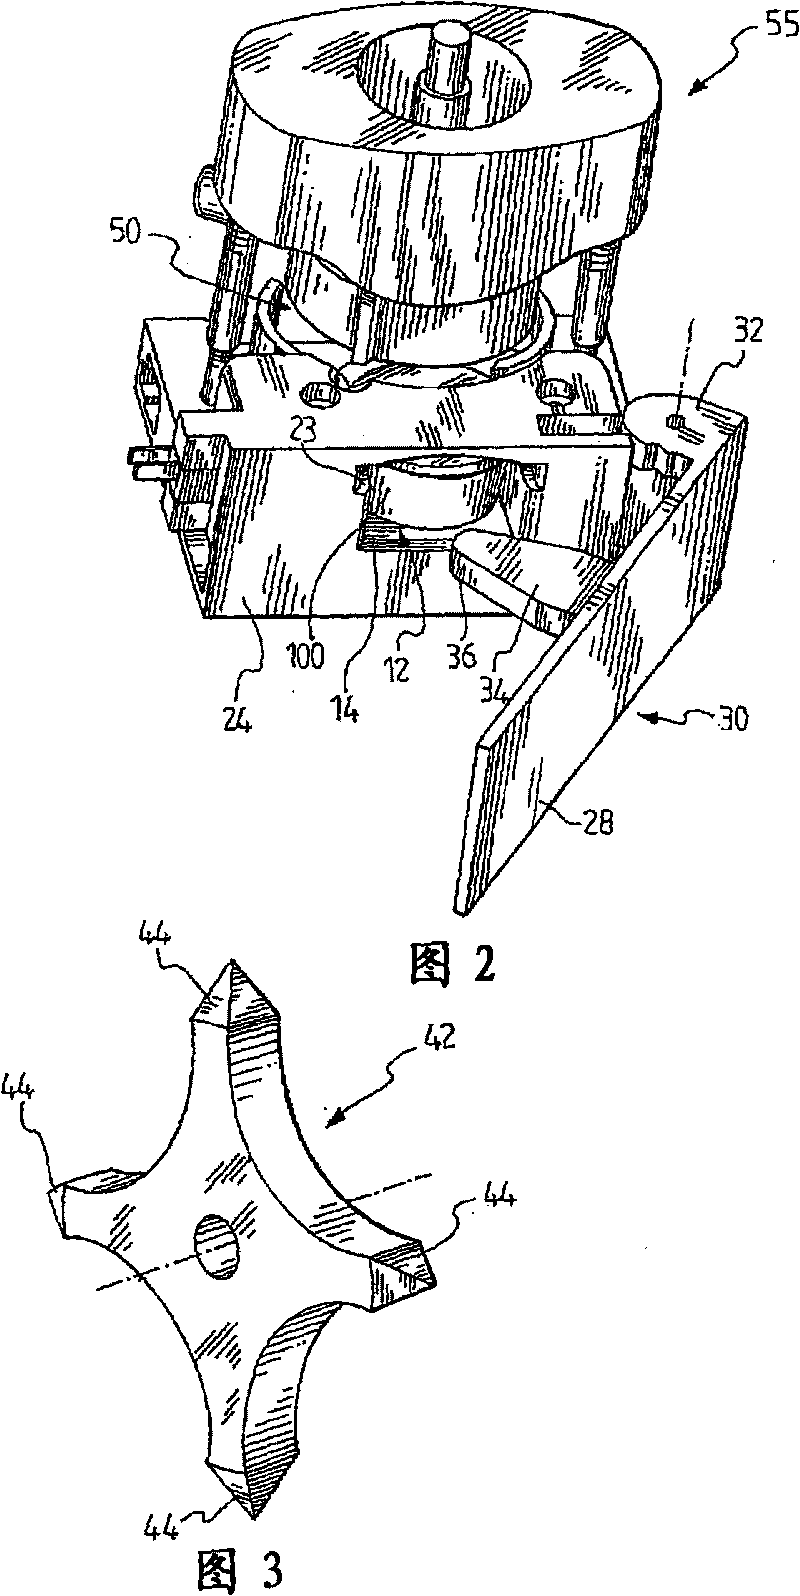 Perforation device for capsules and machine for preparing beverages incorporating said device